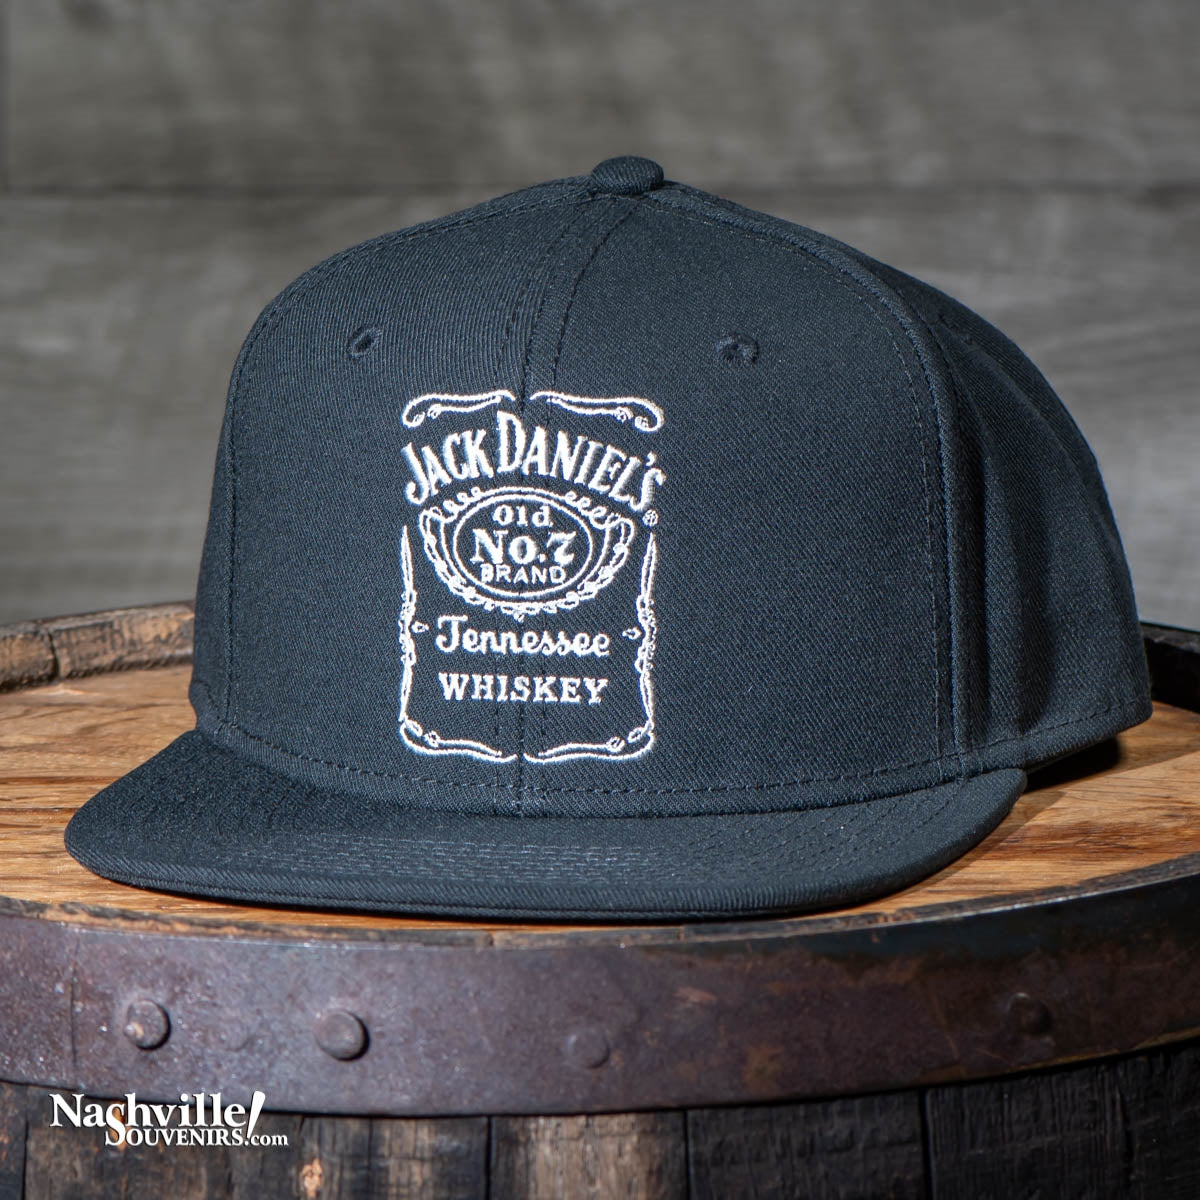 This Jack Daniel's flatbrim hat has the classic Jack Daniel's bottle label logo embroidered on the front crown. Turn it around and you'll find another embroidered Jack Daniel's swing and bug logo above the snap back closure.